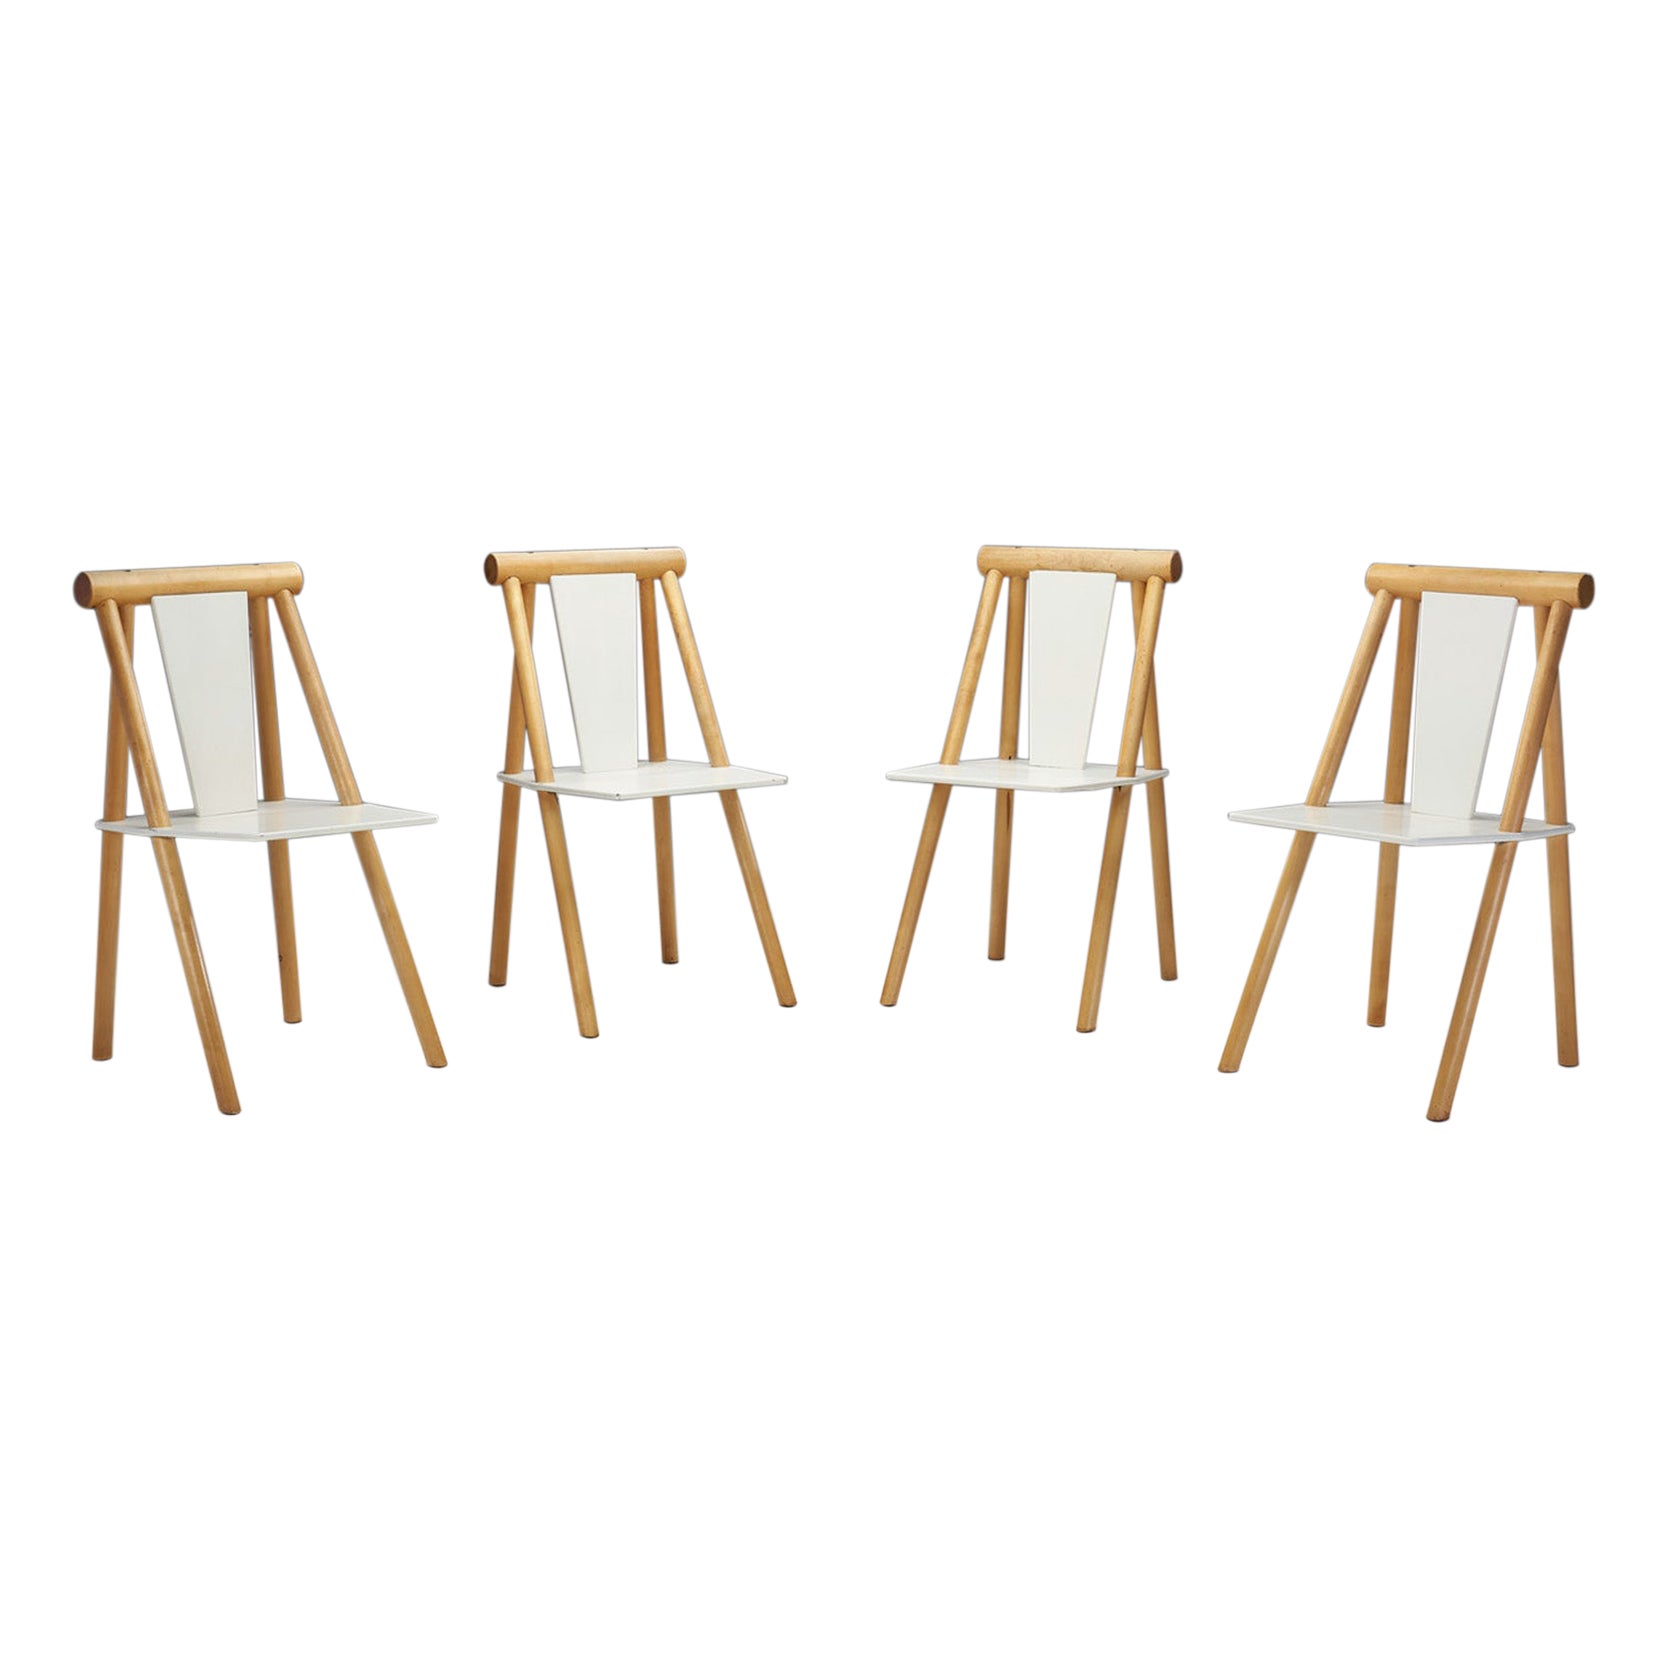 Set of Sculptural European Dining Chairs, Europe late 20th century For Sale